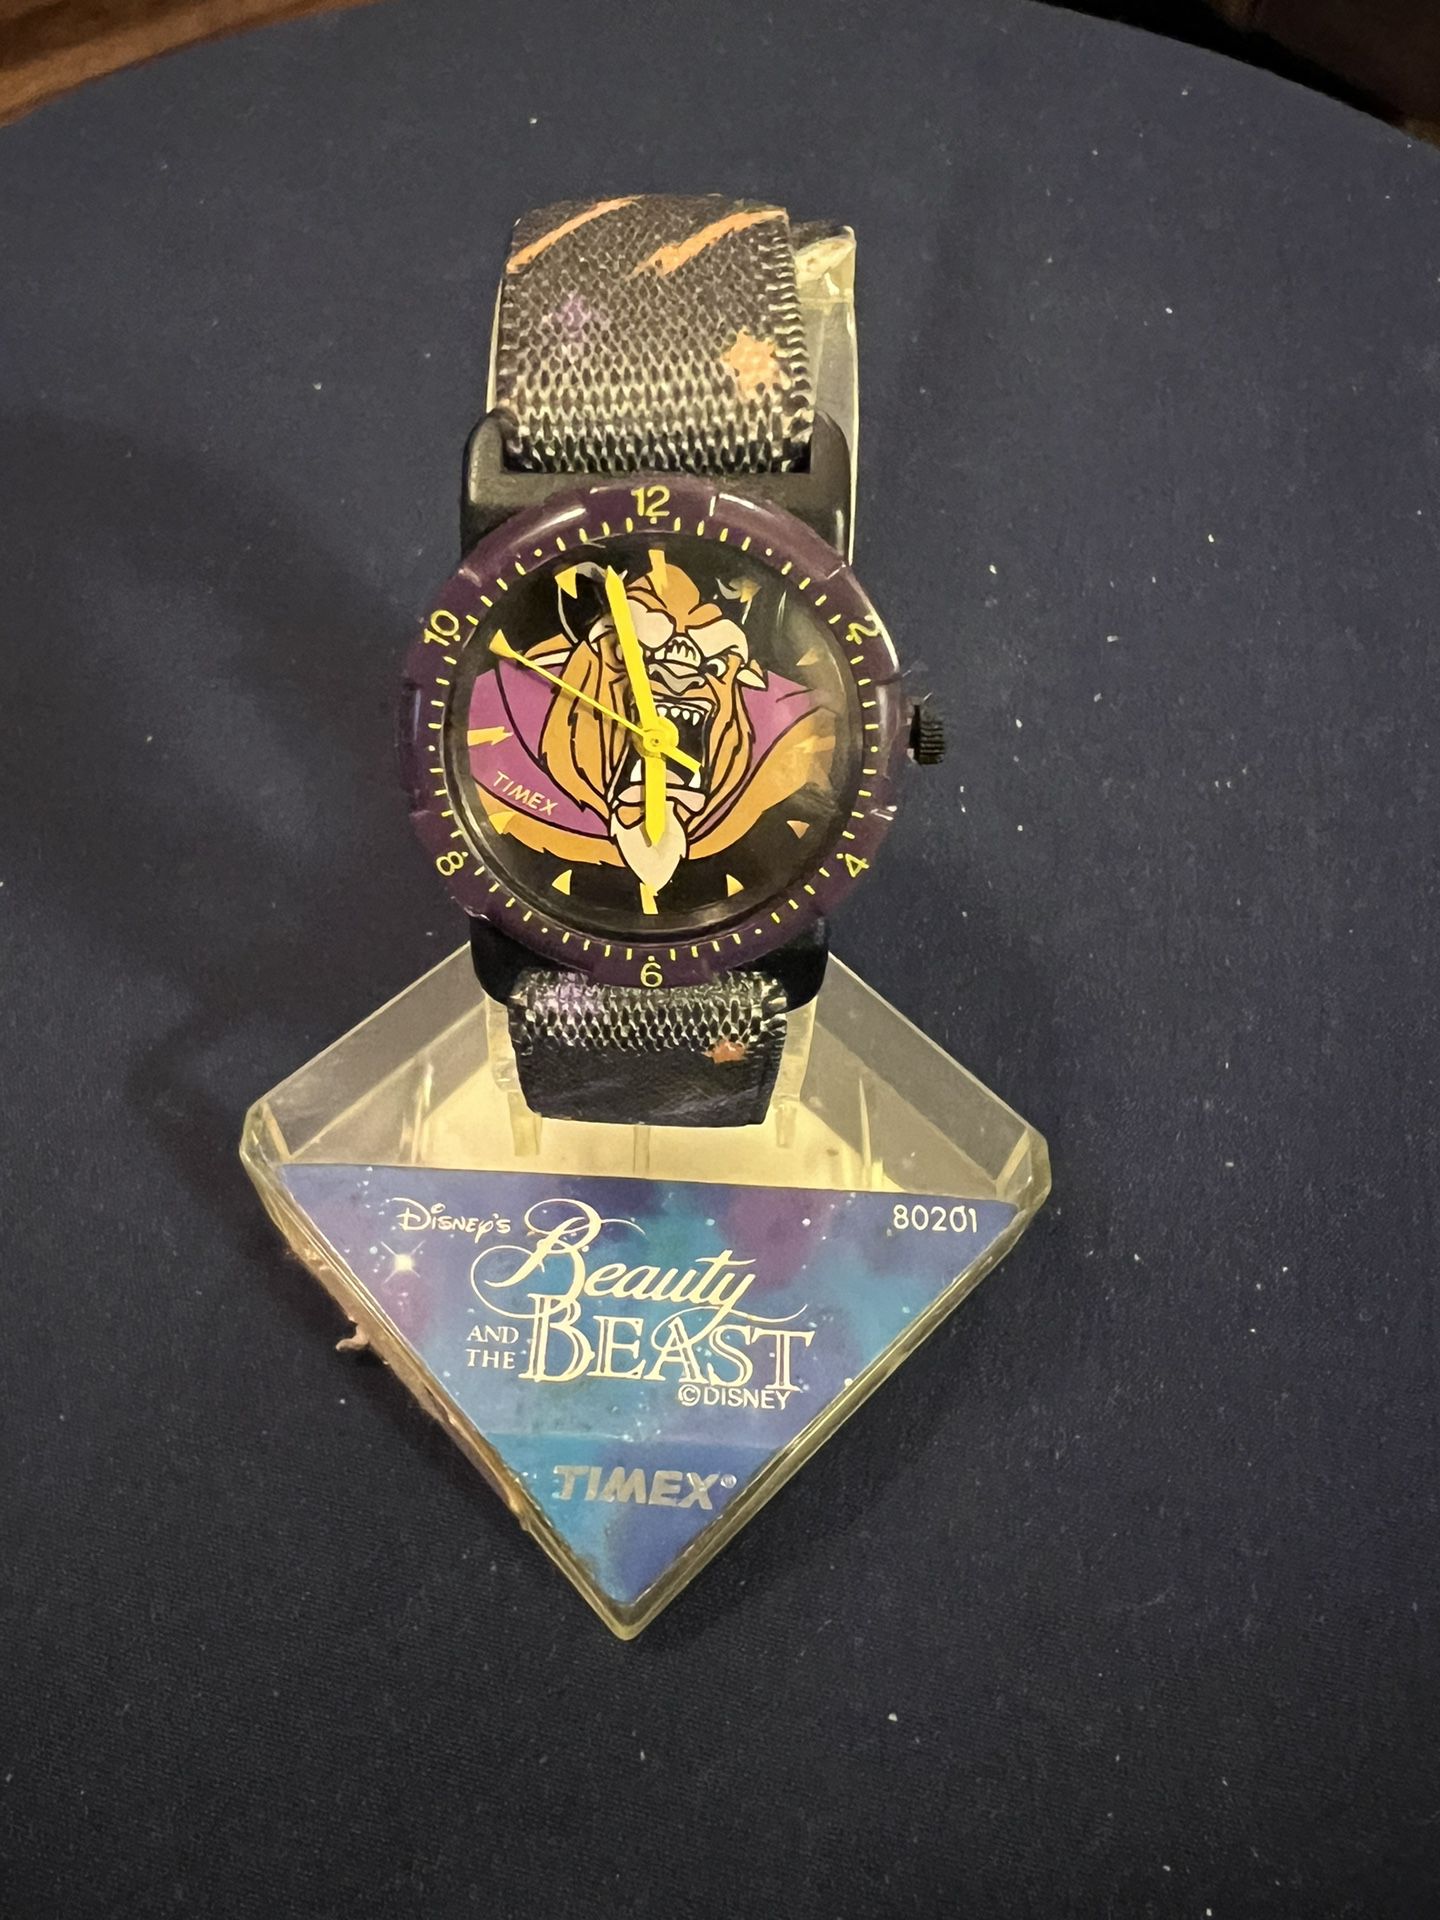 Vintage Disney's Beauty and Beast Watch by Timex Round Shaped Face 